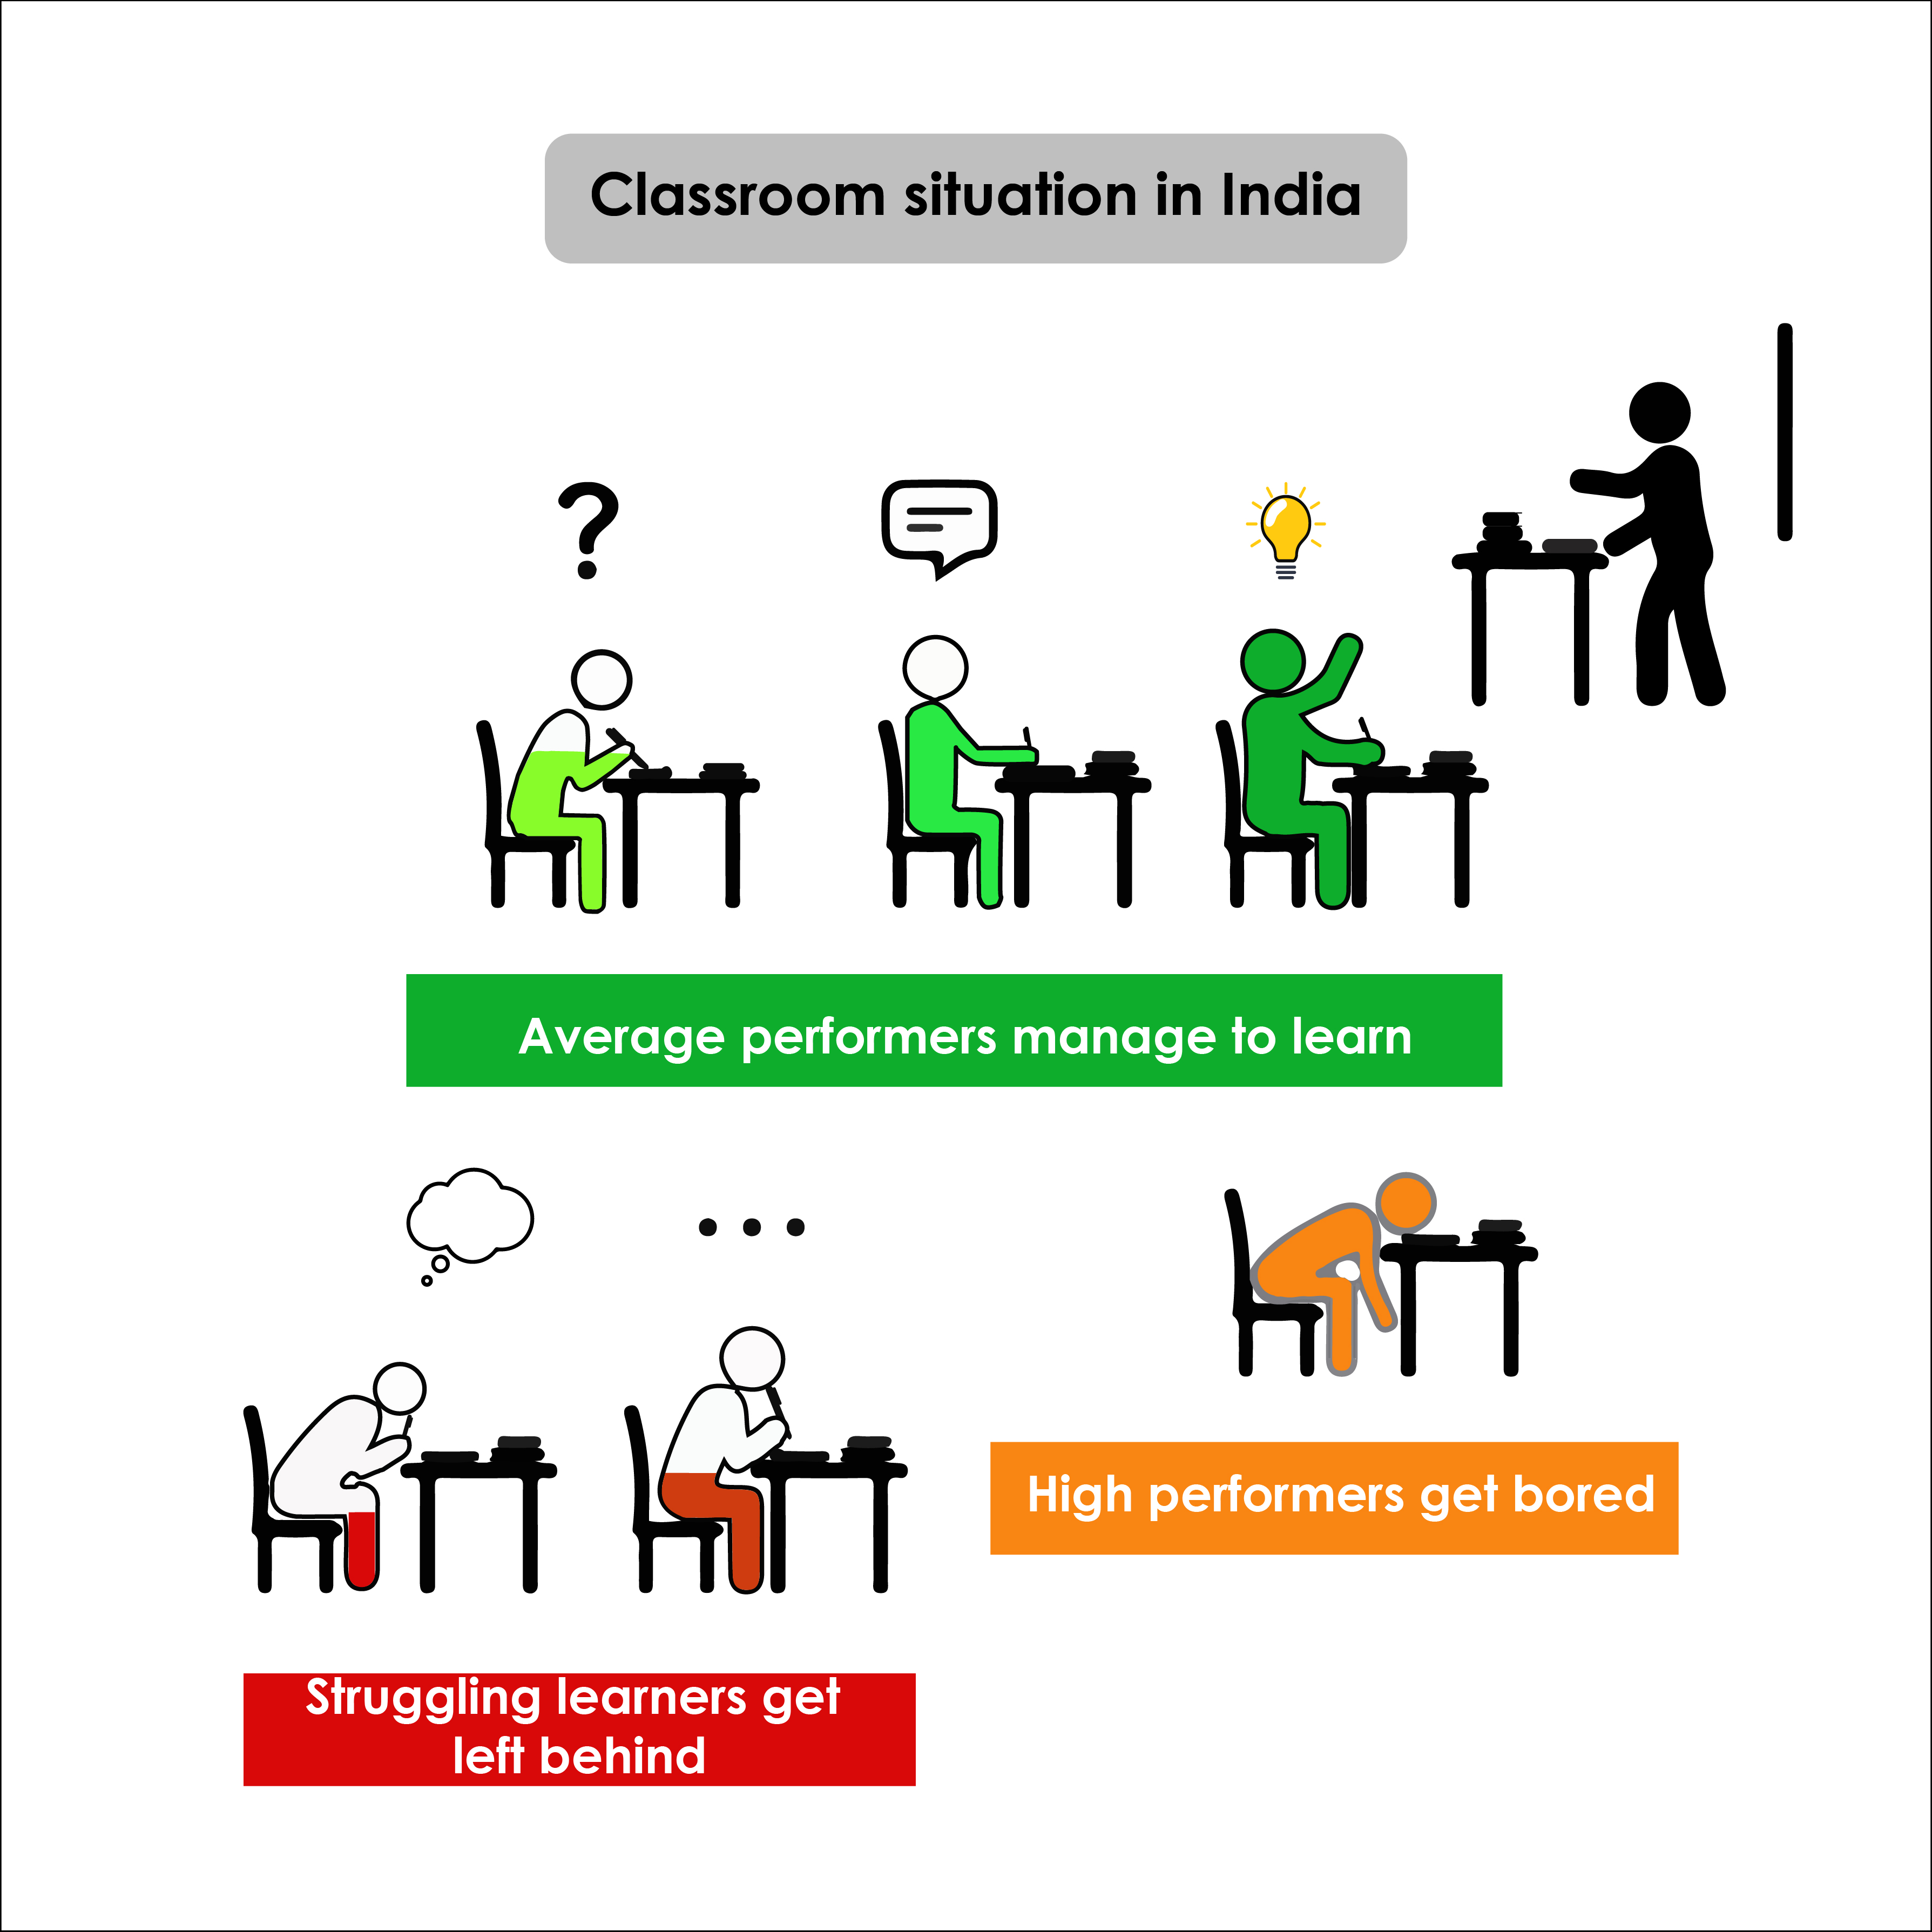 Classroom situations in India